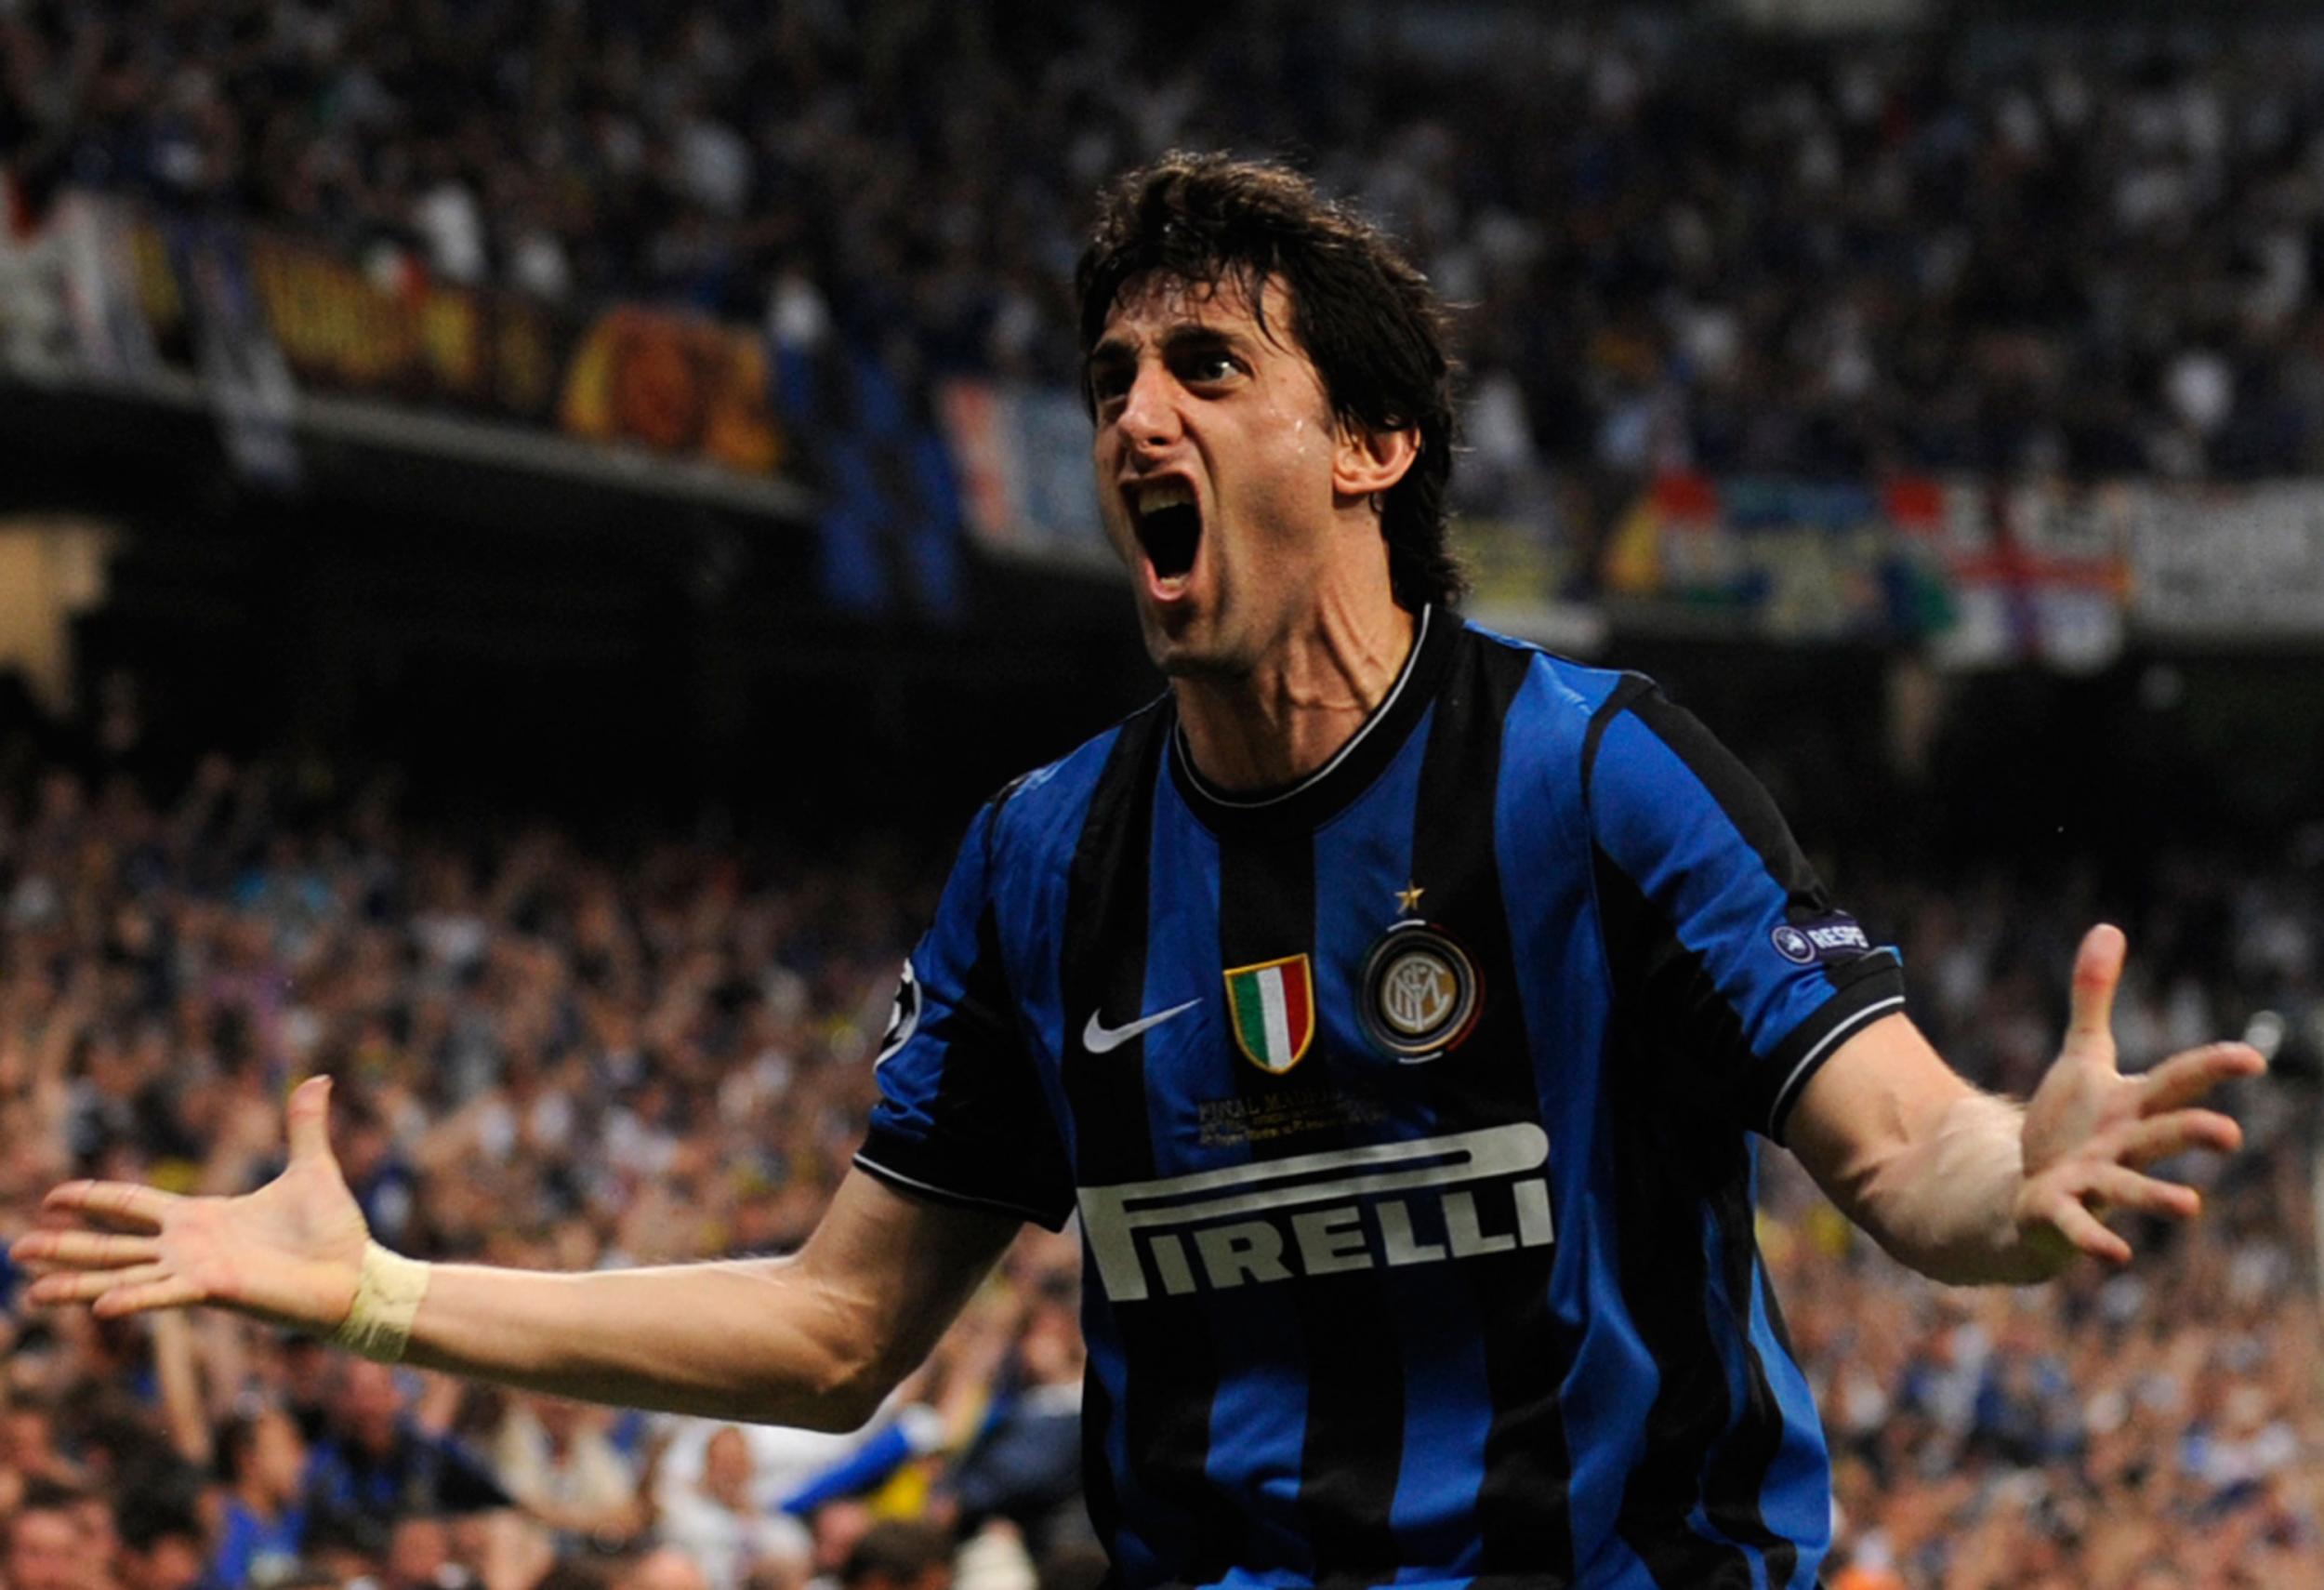 Milito fired Inter to Champions League glory in 2010